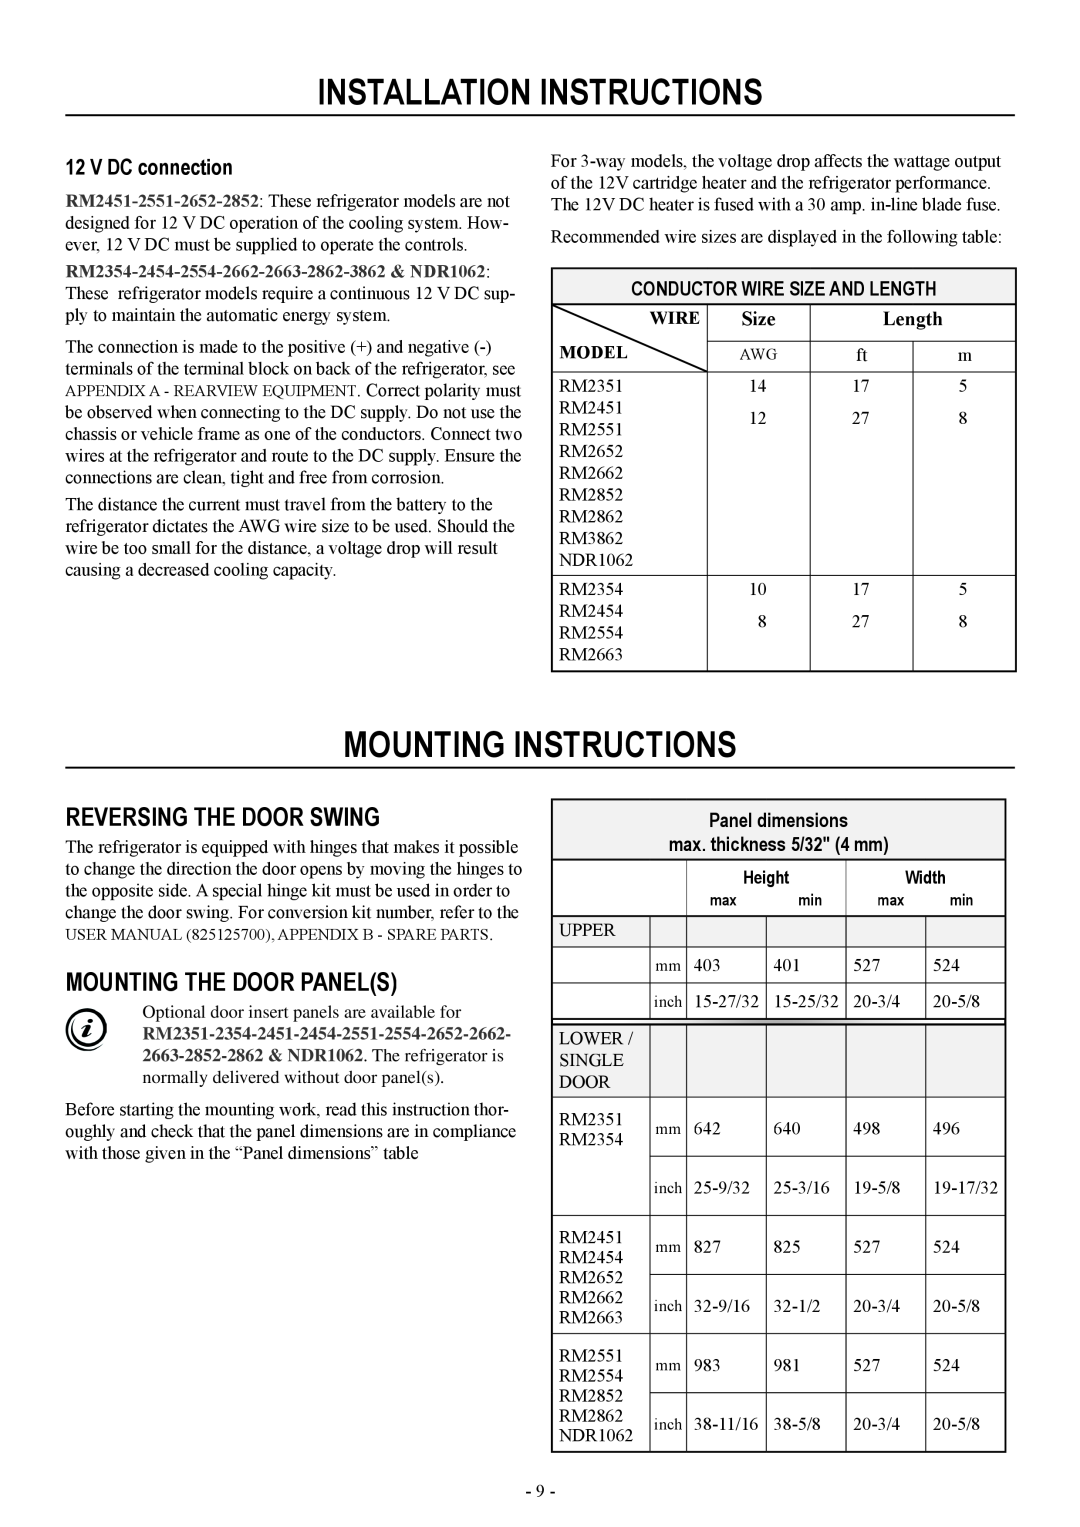 Dometic RM2551 Mounting Instructions, Reversing The Door Swing, Mounting The Door Panels, Installation Instructions, Wire 